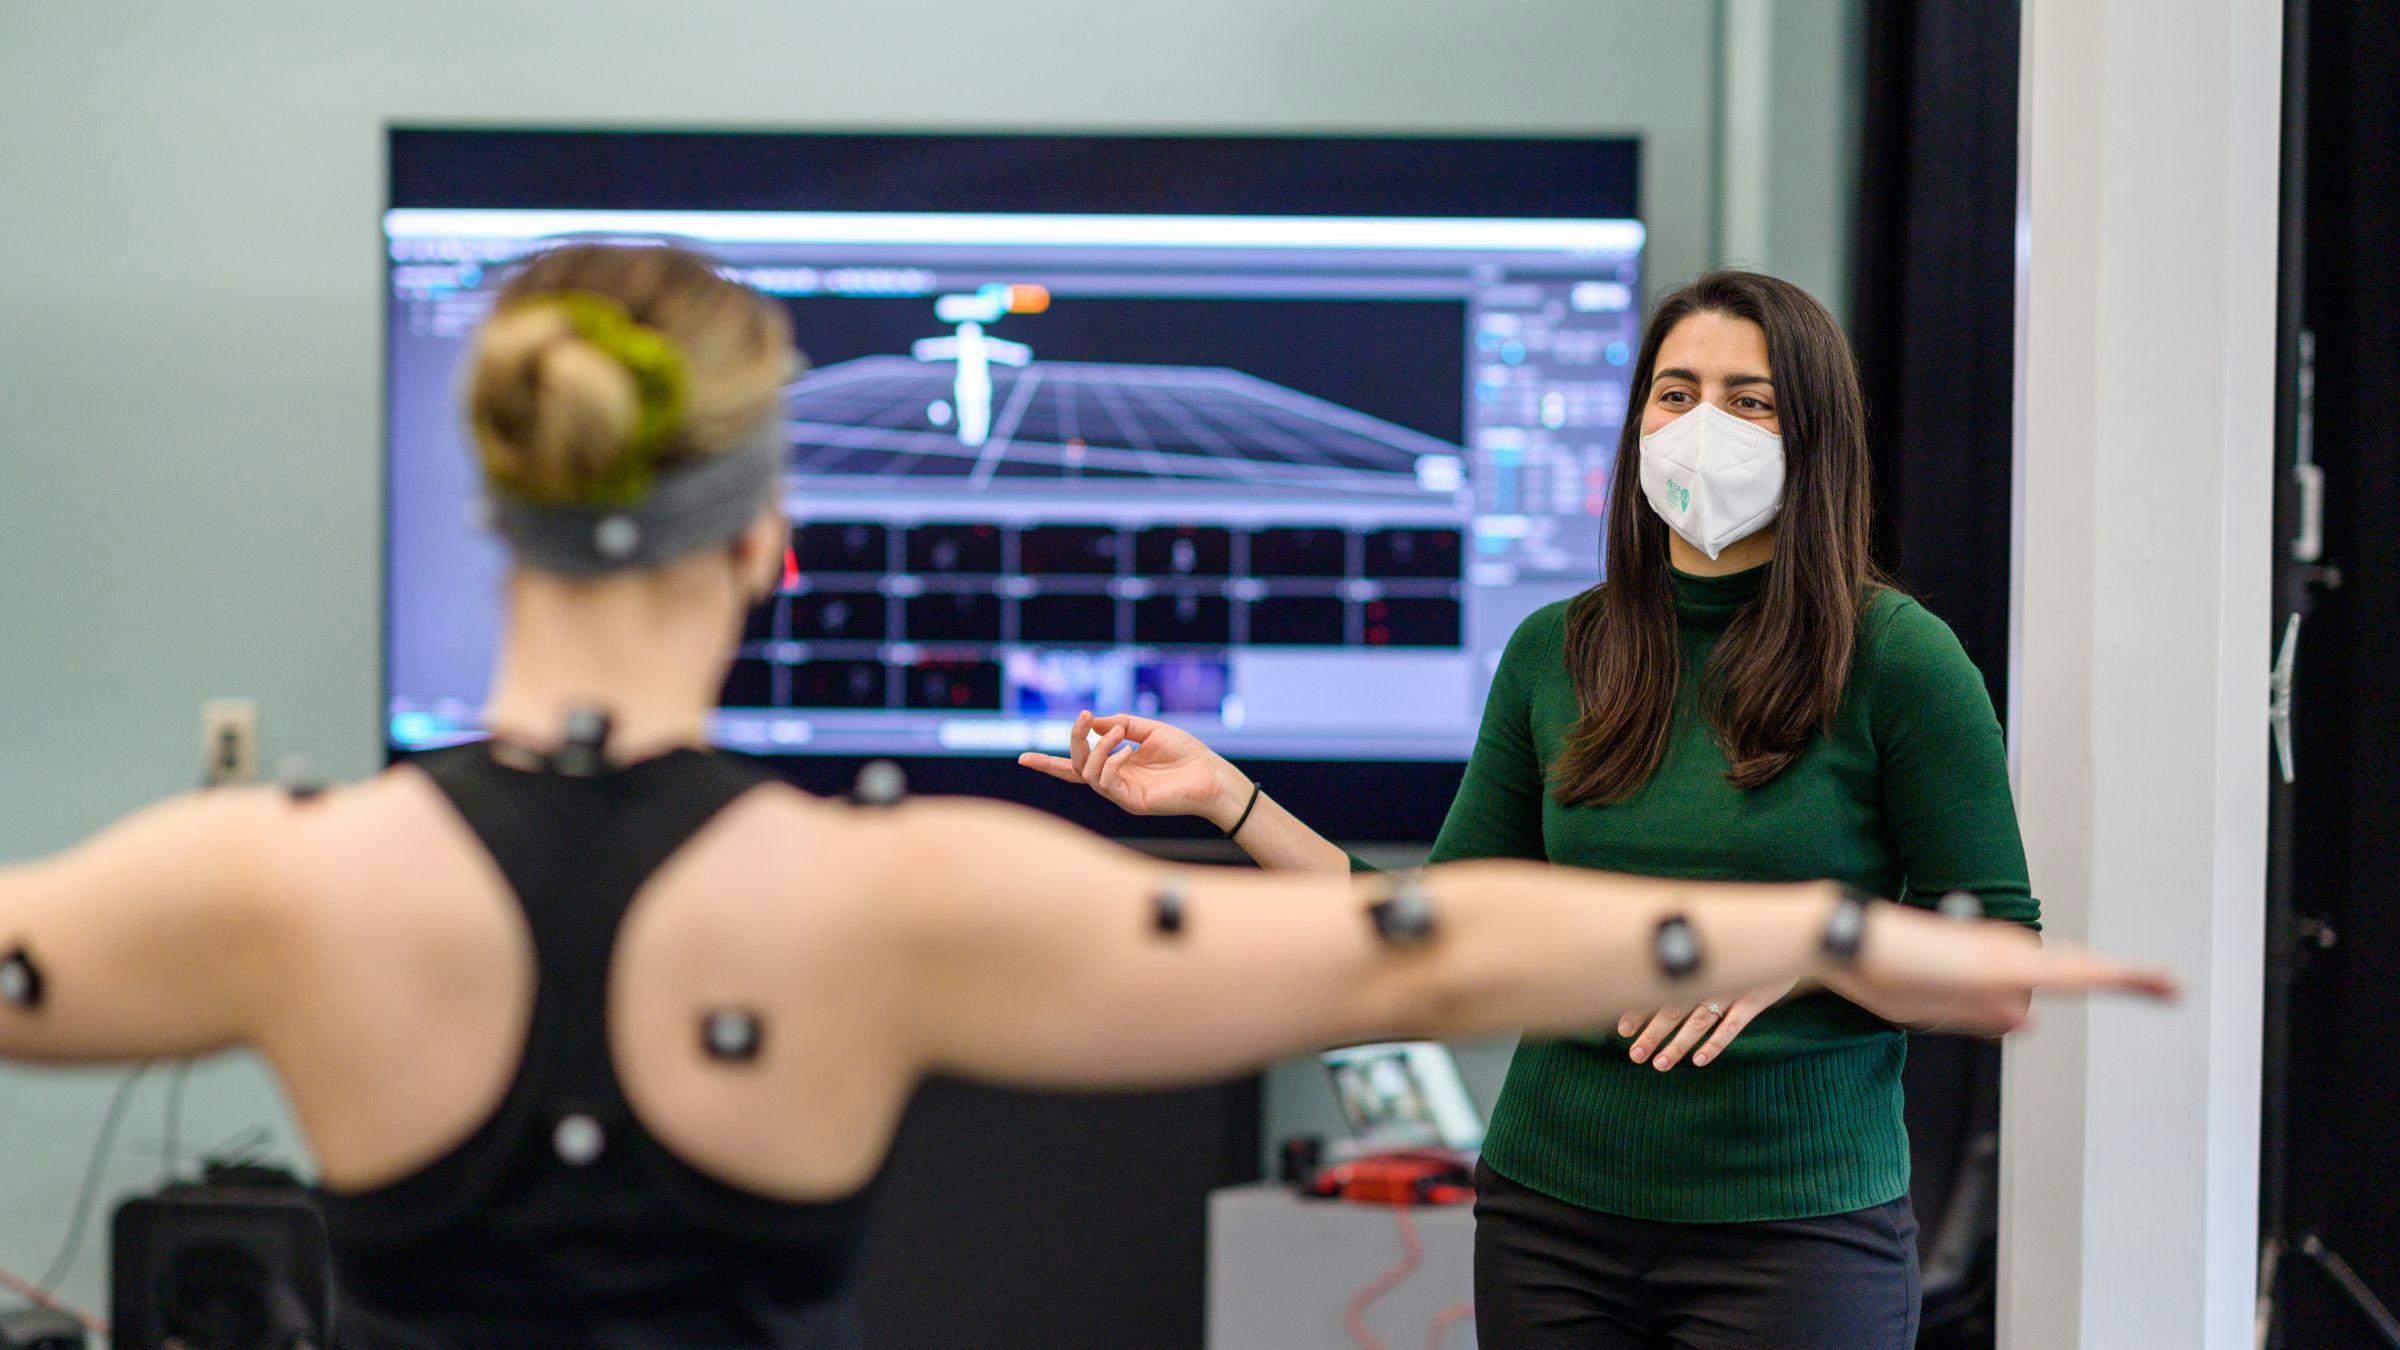 Model with motion capture nodes attached to arms raises arms with instructor in background